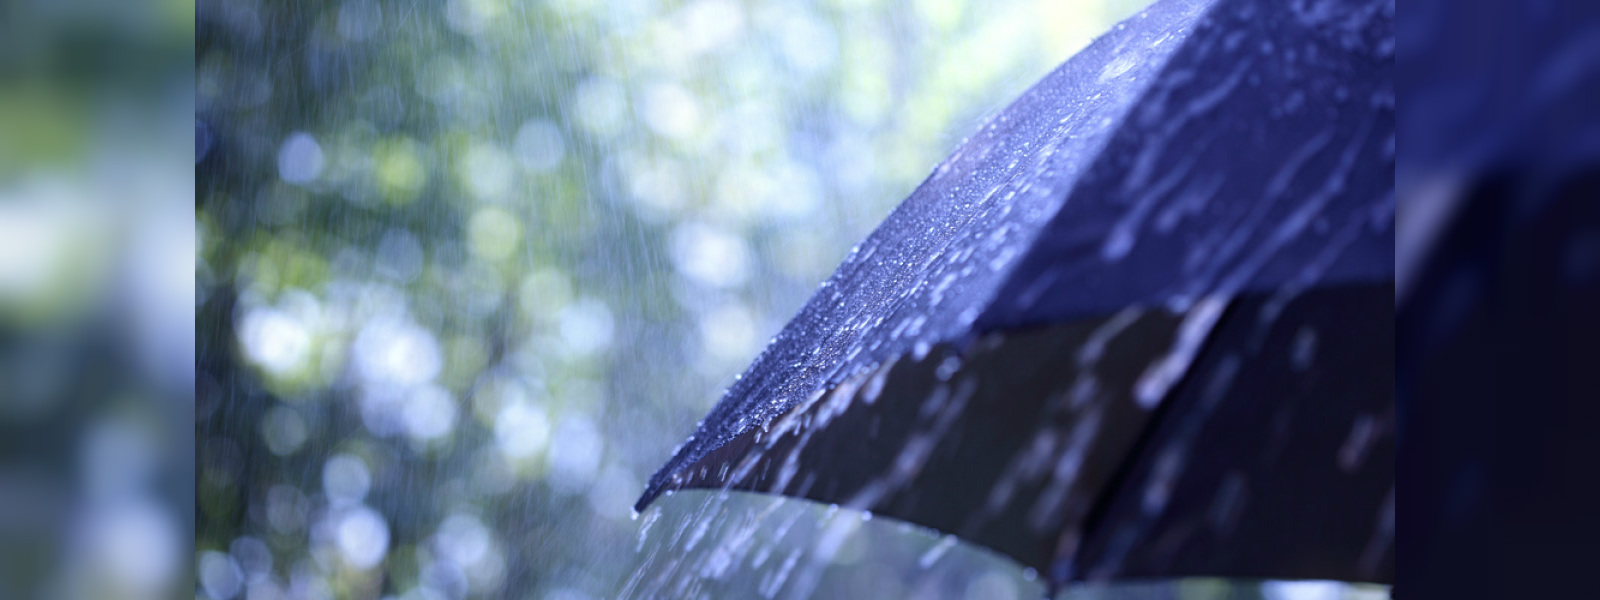 Rainfall of 100 mm to be expected in several areas